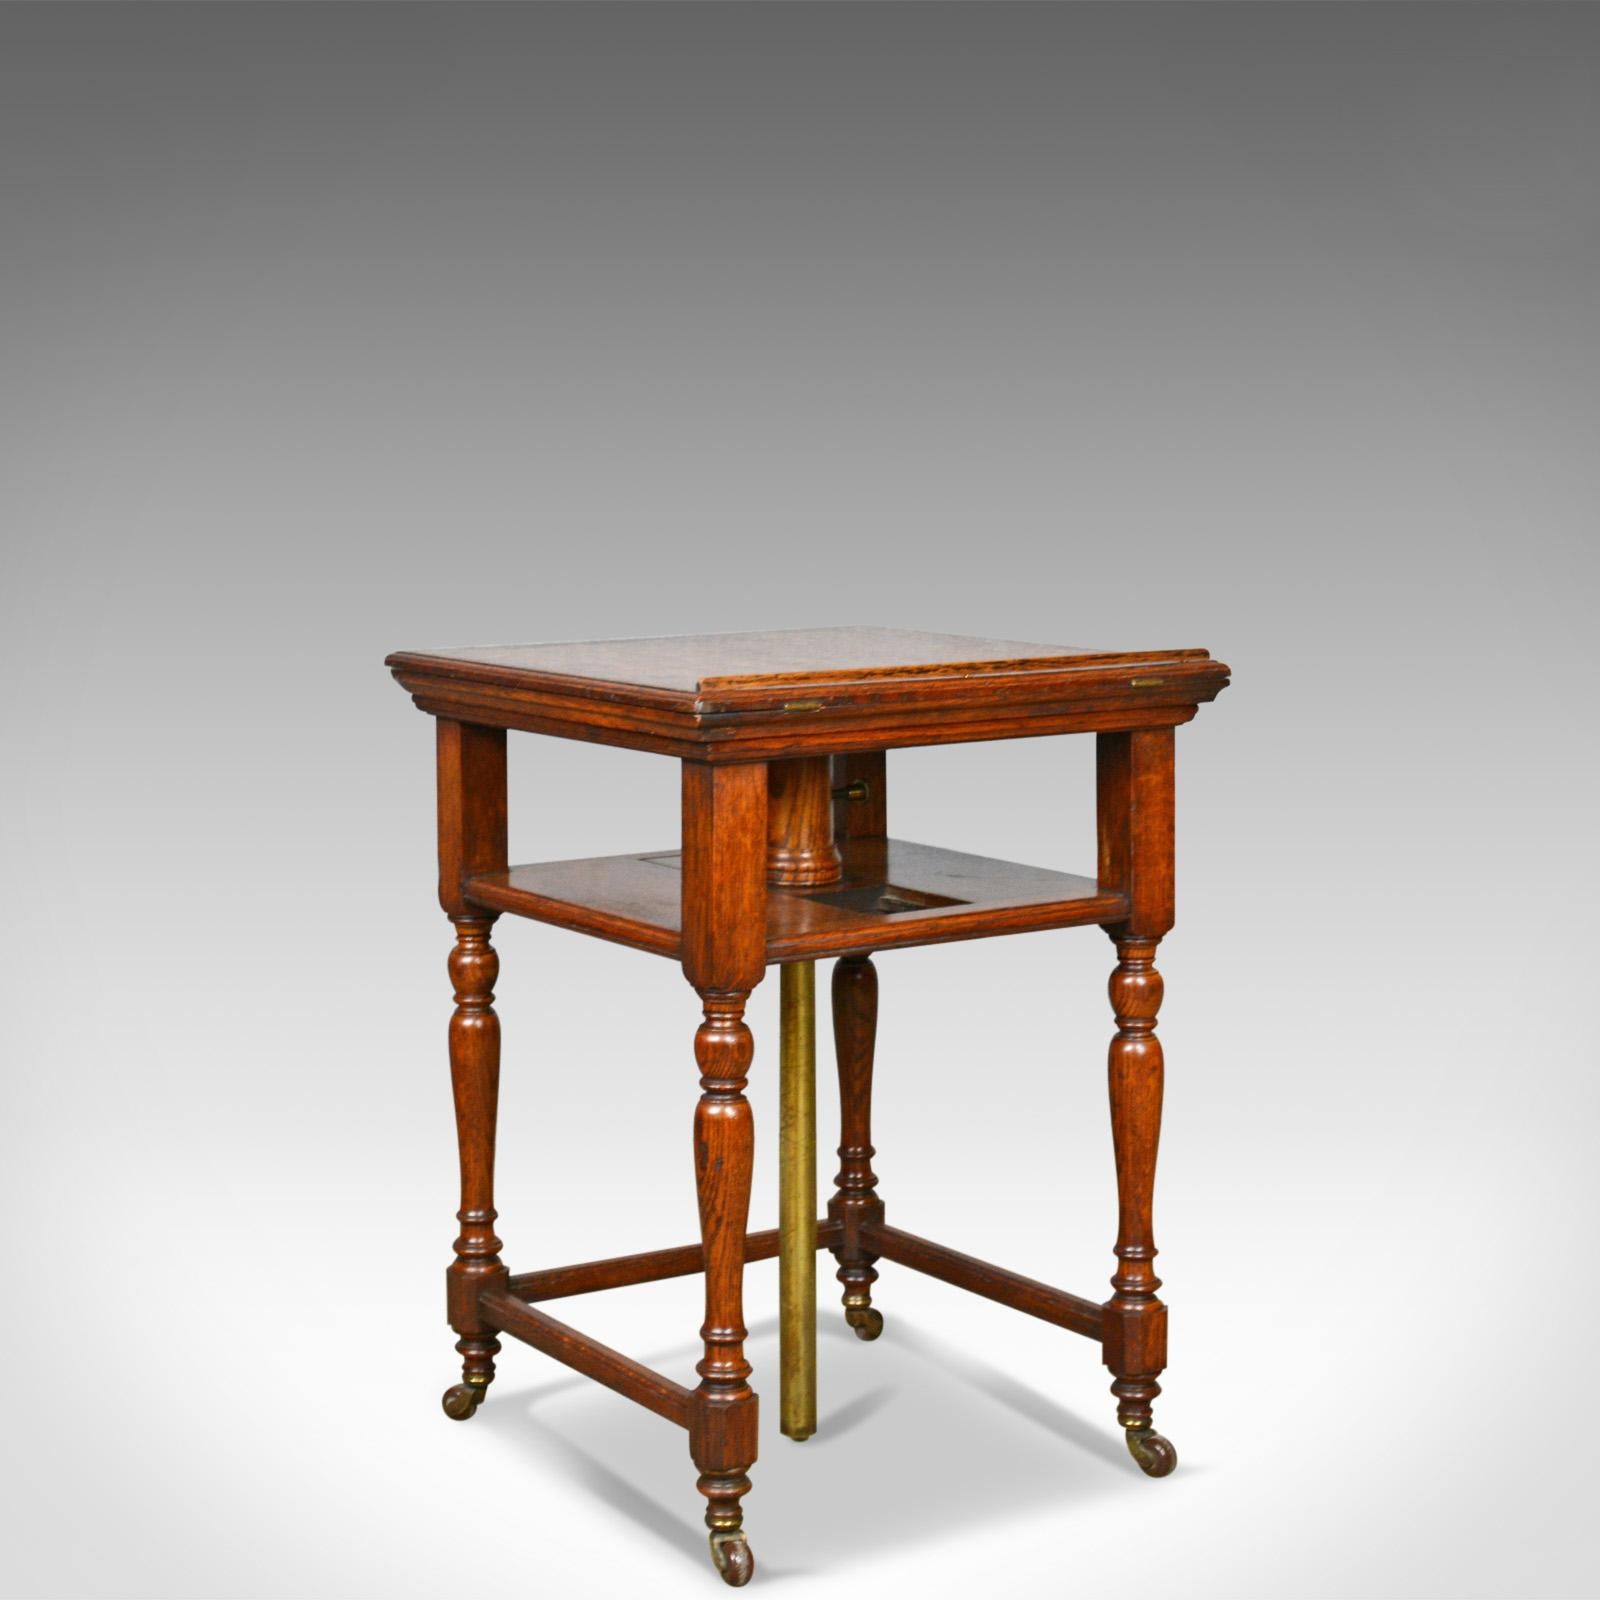 Victorian Antique, Metamorphic, Side Table, Lectern, Oak, Library, Reading, circa 1860